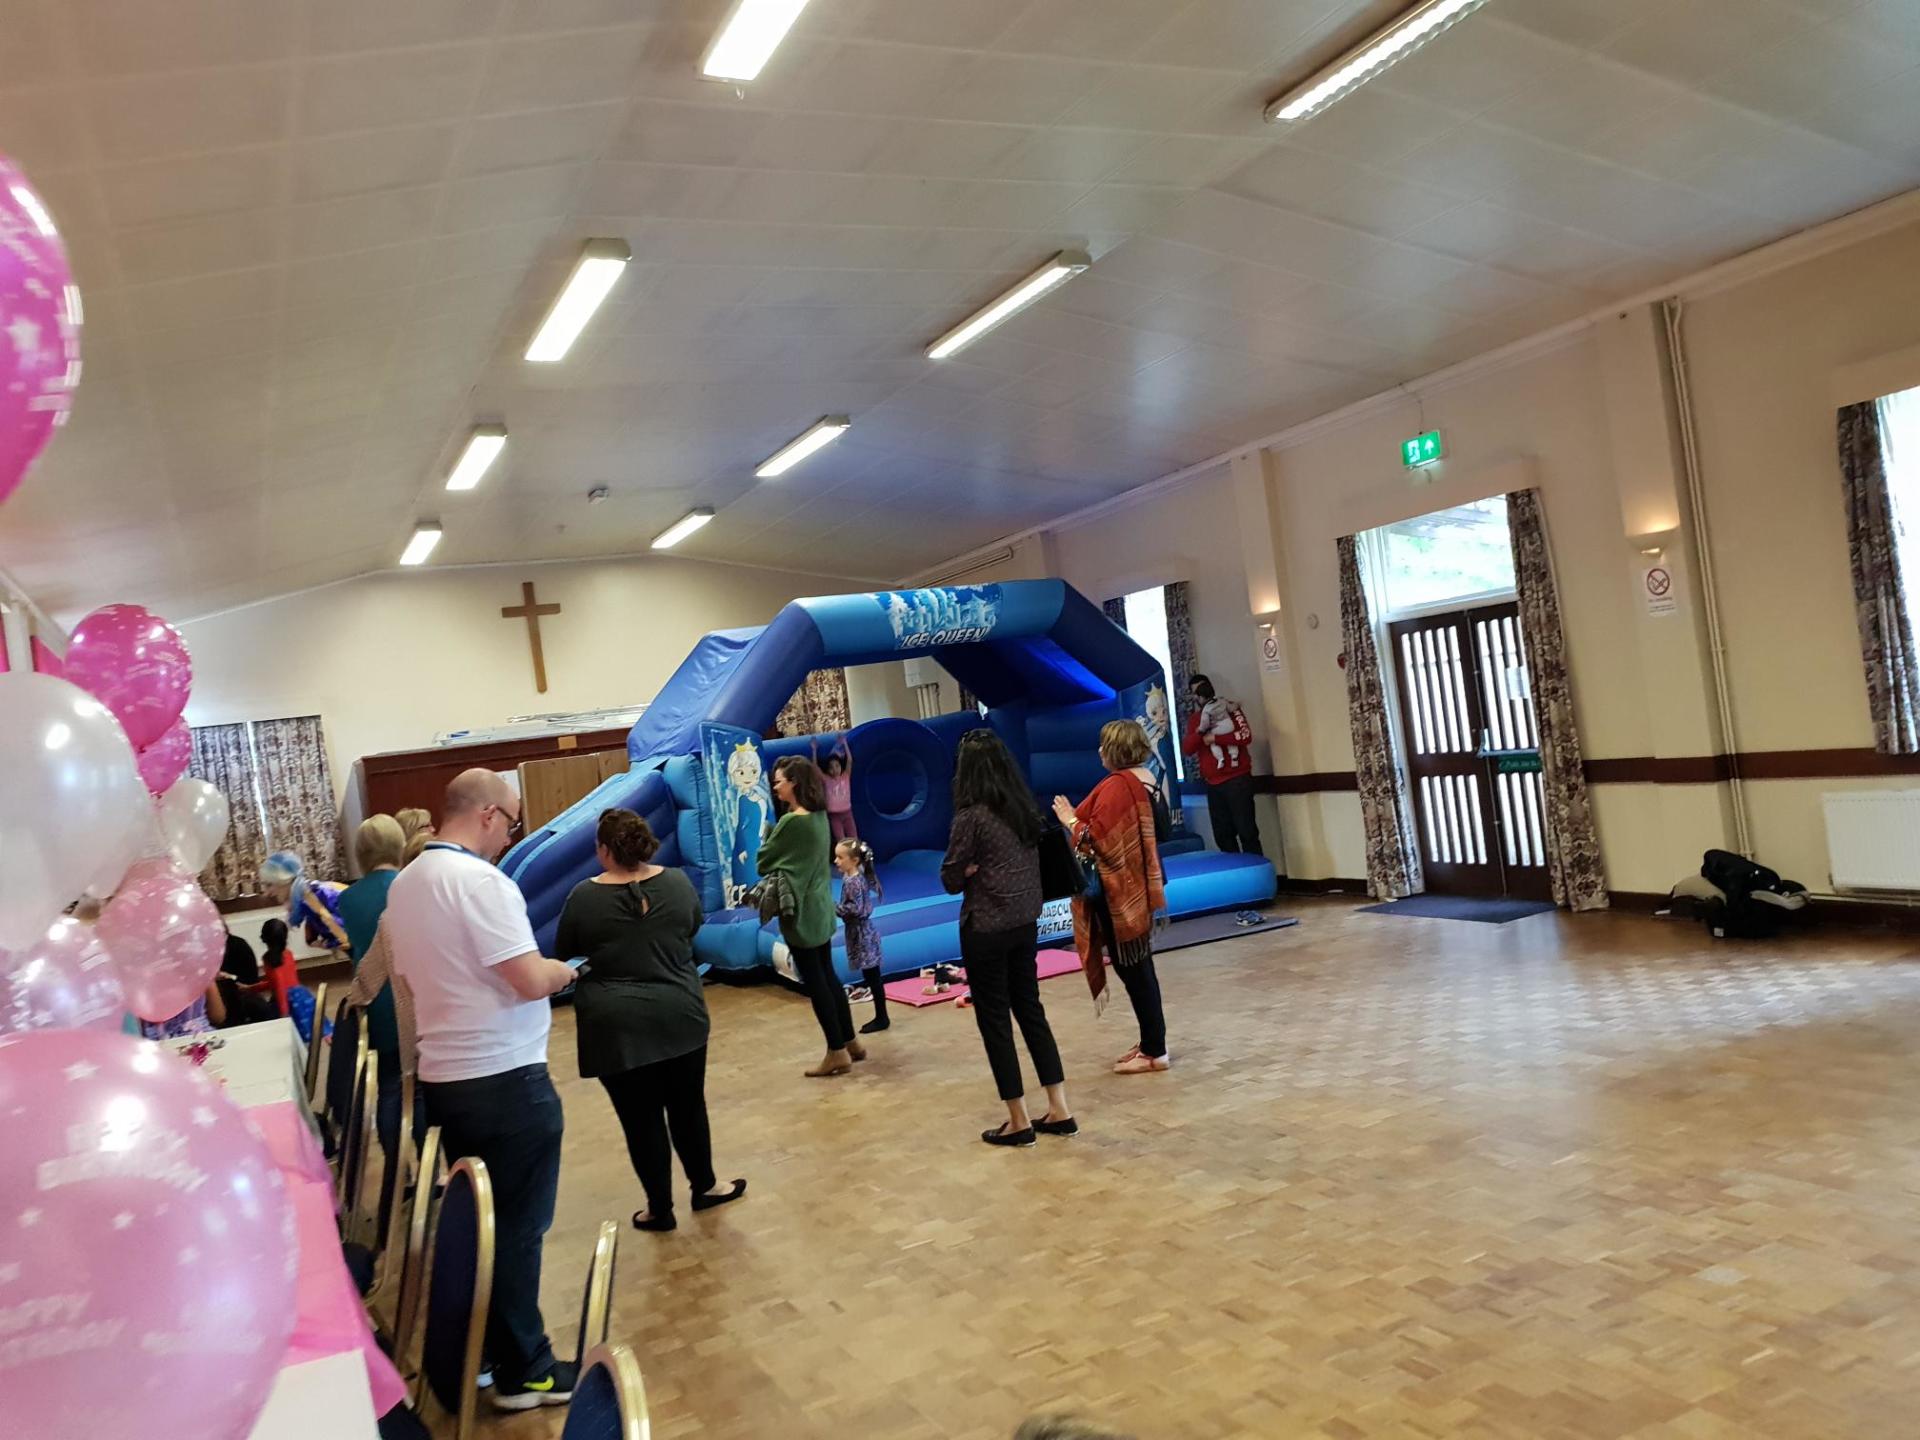 snow queen themed slide combo bouncy castle in village hall